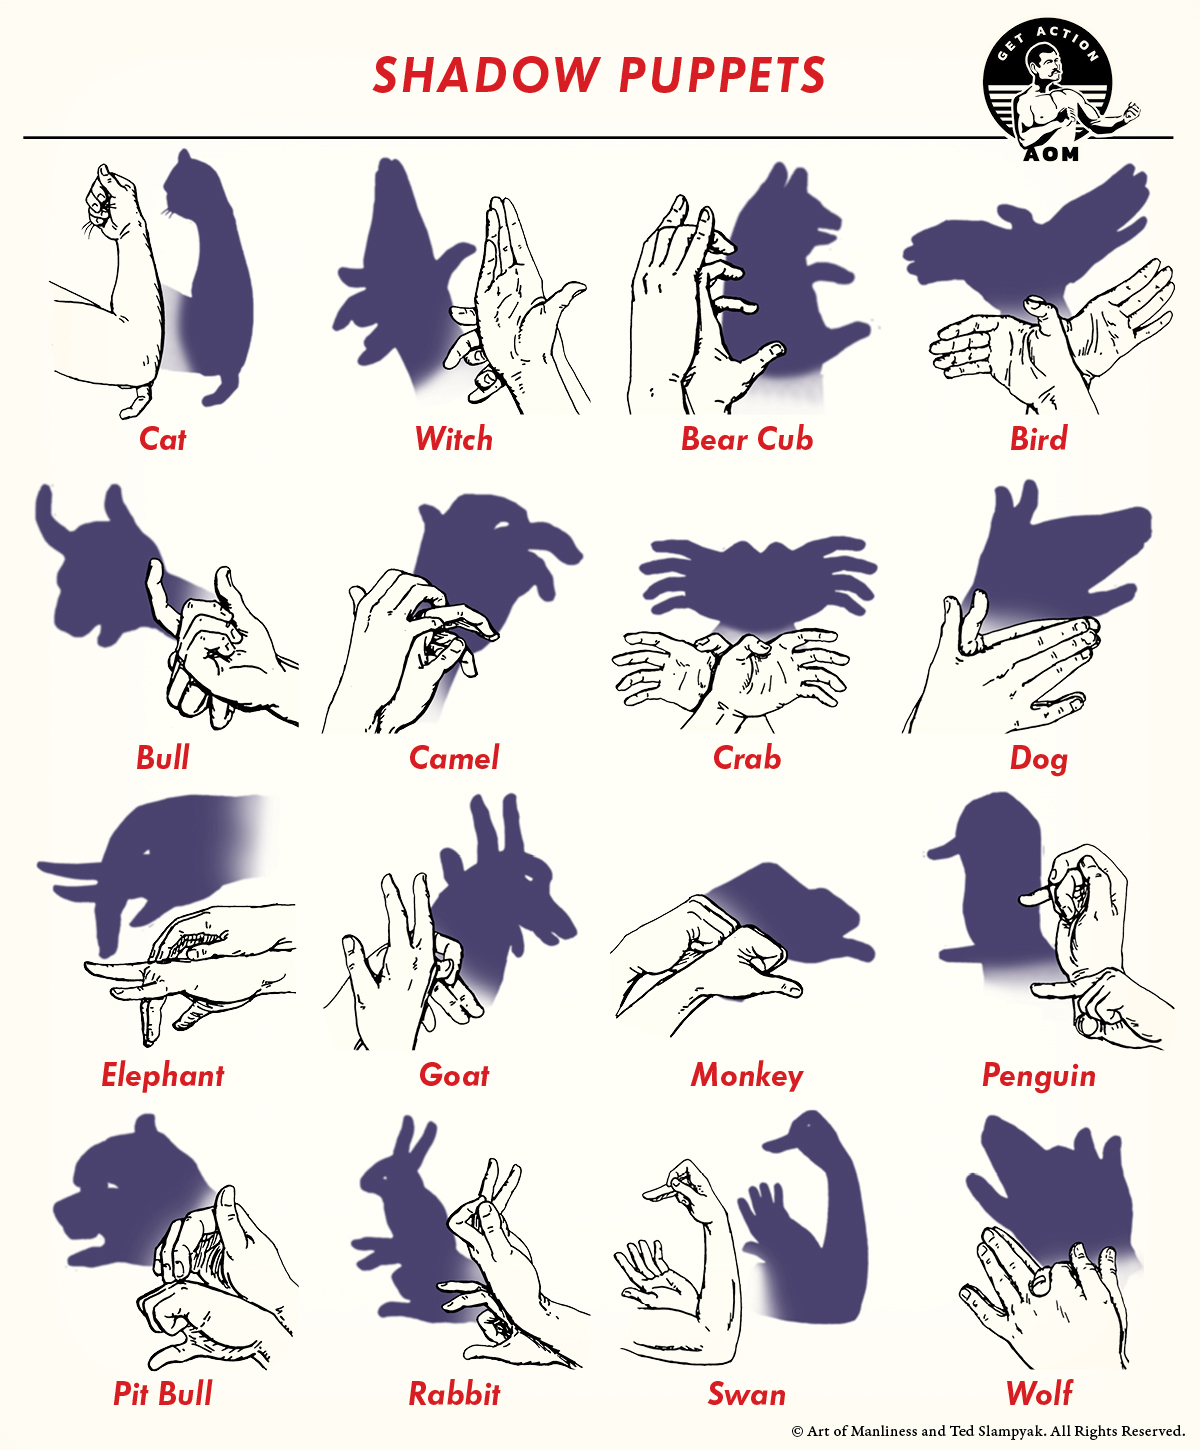 How to Make 16 Shadow Puppets | The Art of Manliness